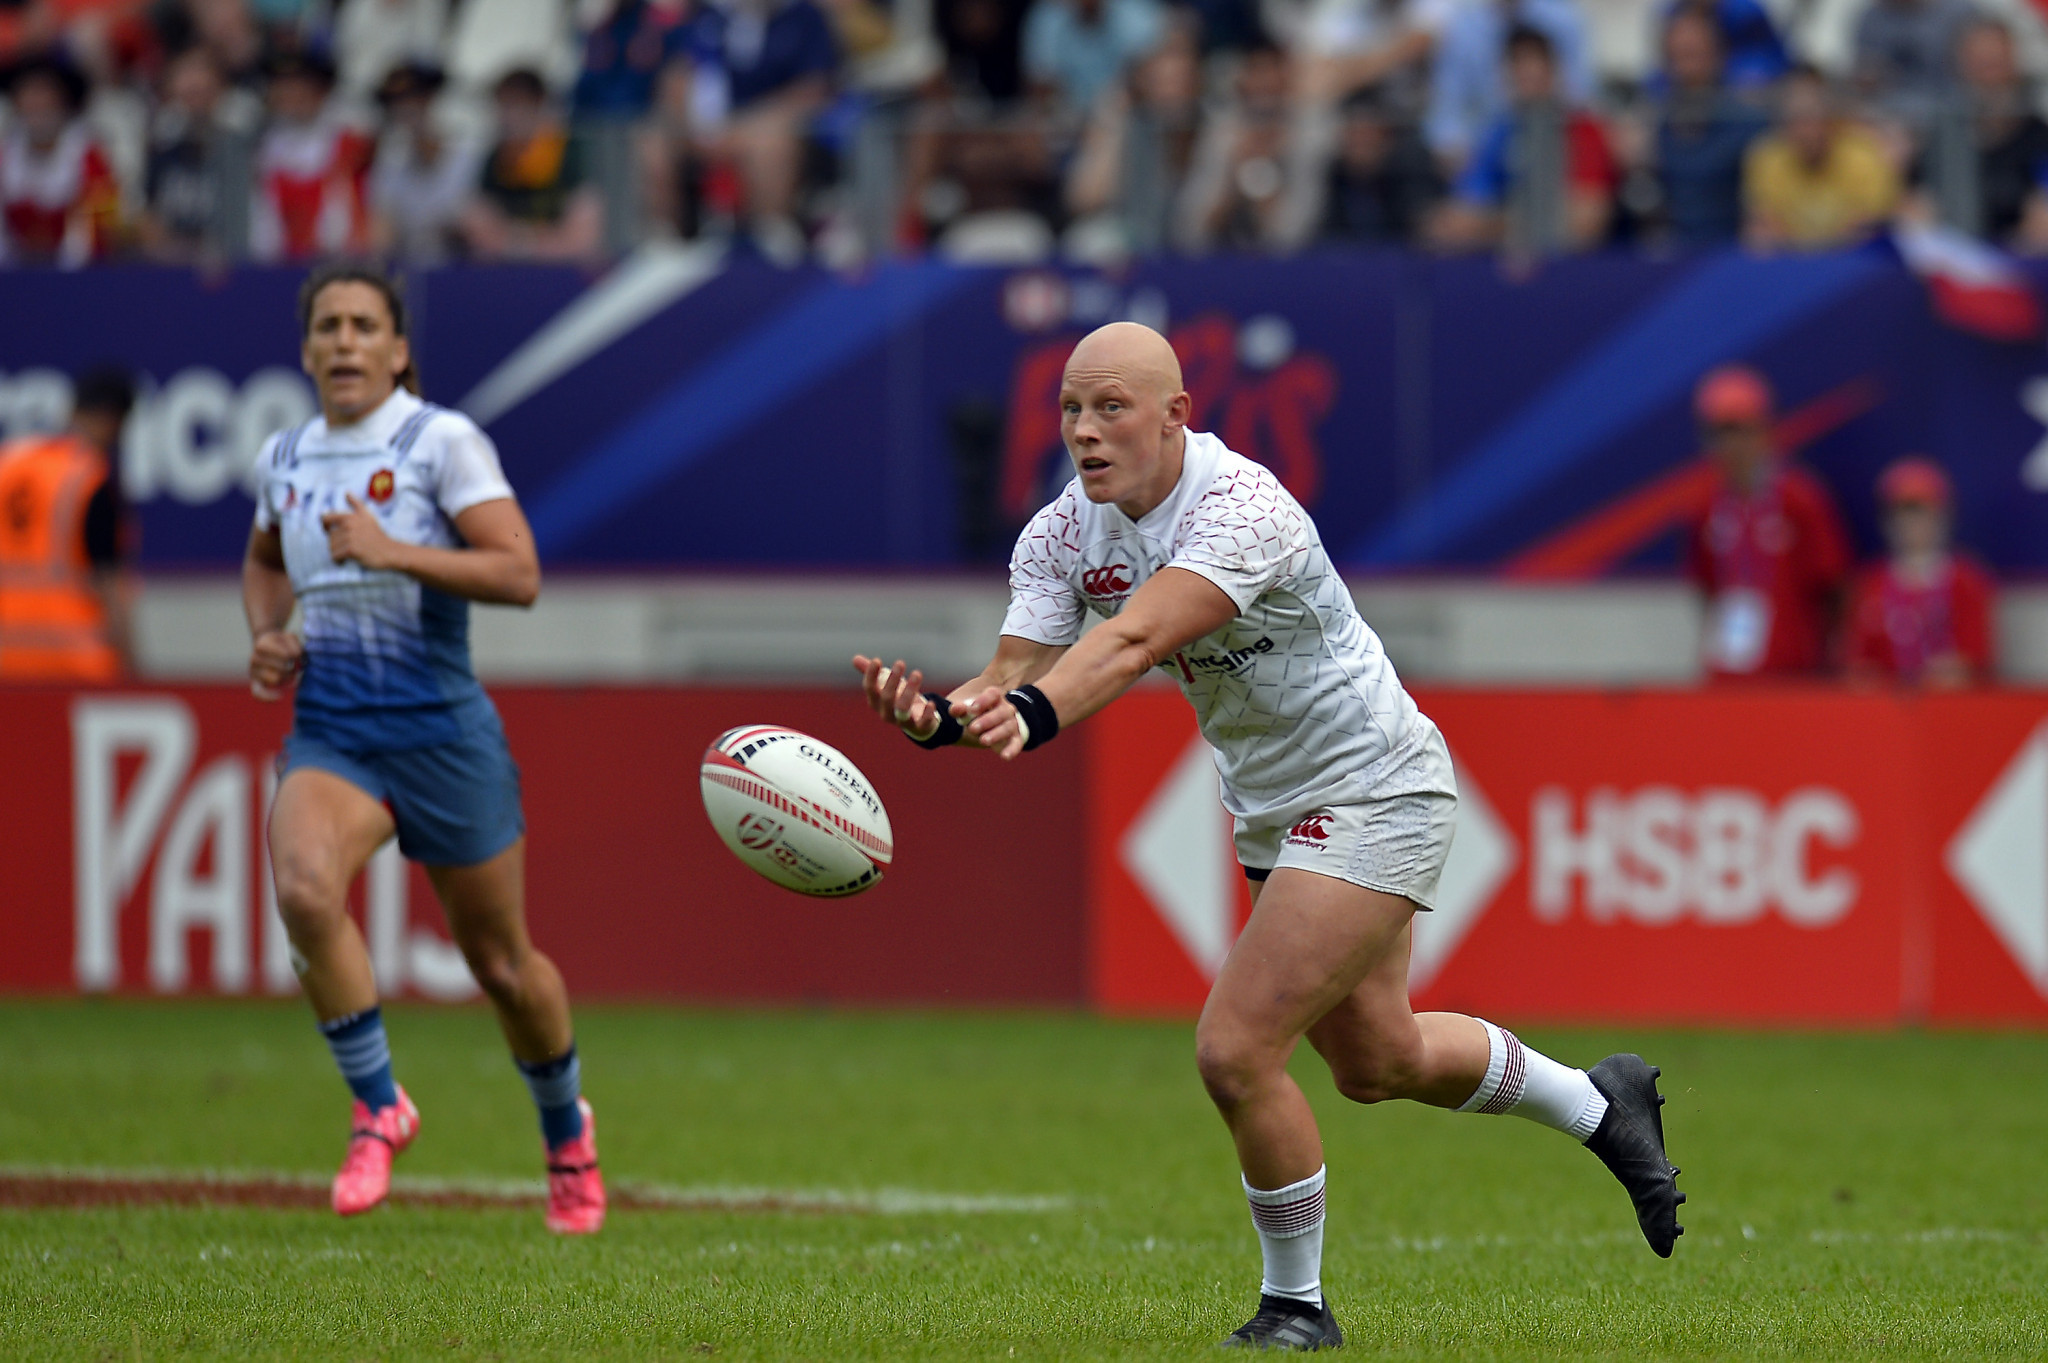 Rugby sevens star Fisher reveals experience of gender stereotypes on International Women's Day